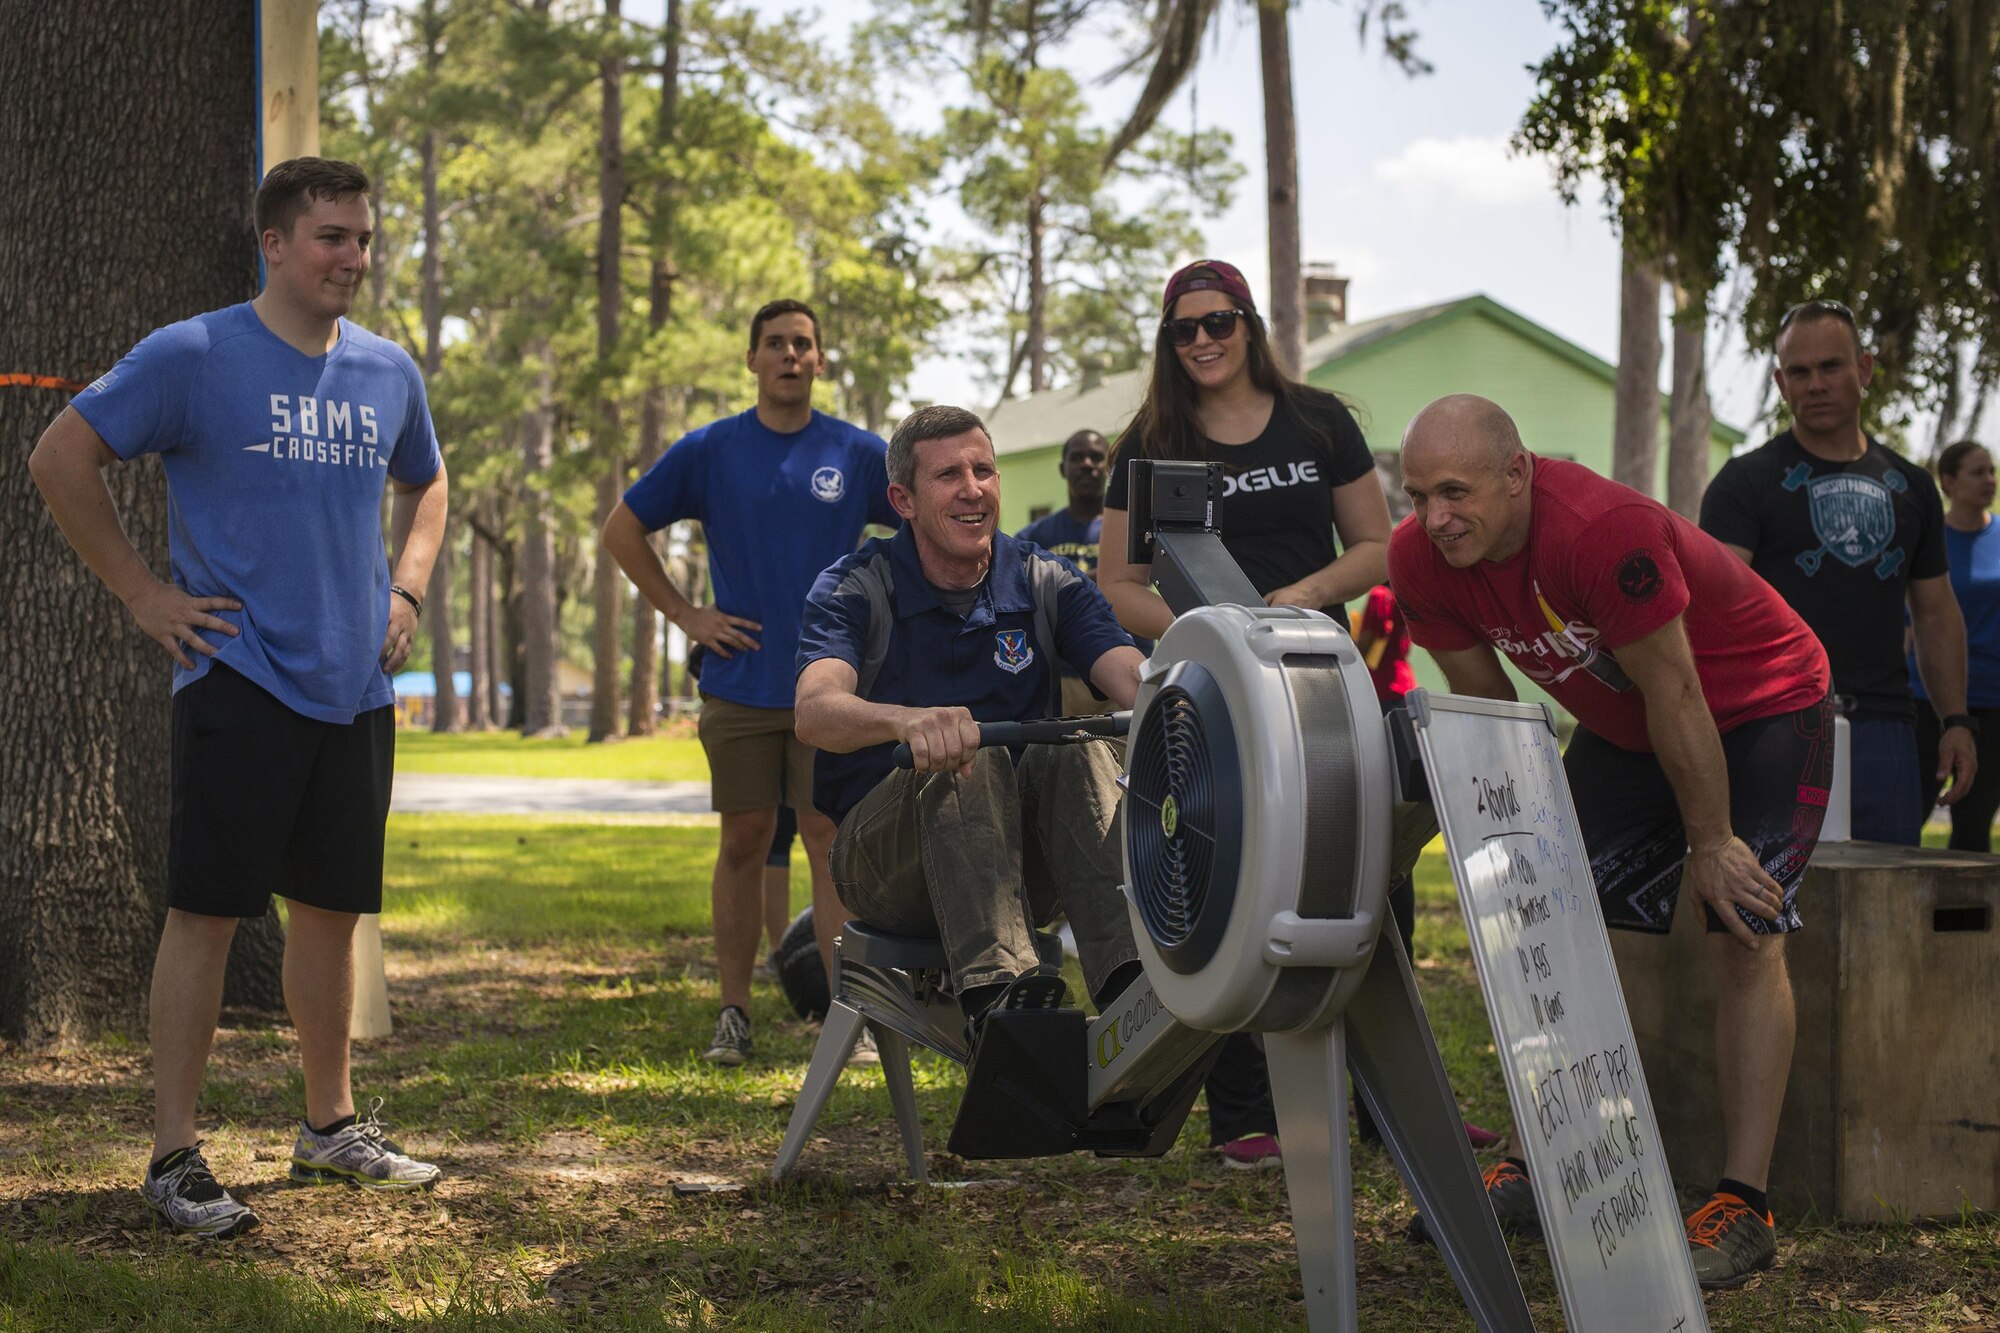 U.S. Air Force Airmen watch as Col. Thomas Kunkel, 23d Wing commander, sets a new high score on the rowing machine during Comprehensive Airmen Fitness day, April 29, 2016, at Moody Air Force Base, Ga. More than 30 clubs were available for Airmen to join in support of the social pillar. (U.S. Air Force photo by Airman Daniel Snider/Released)